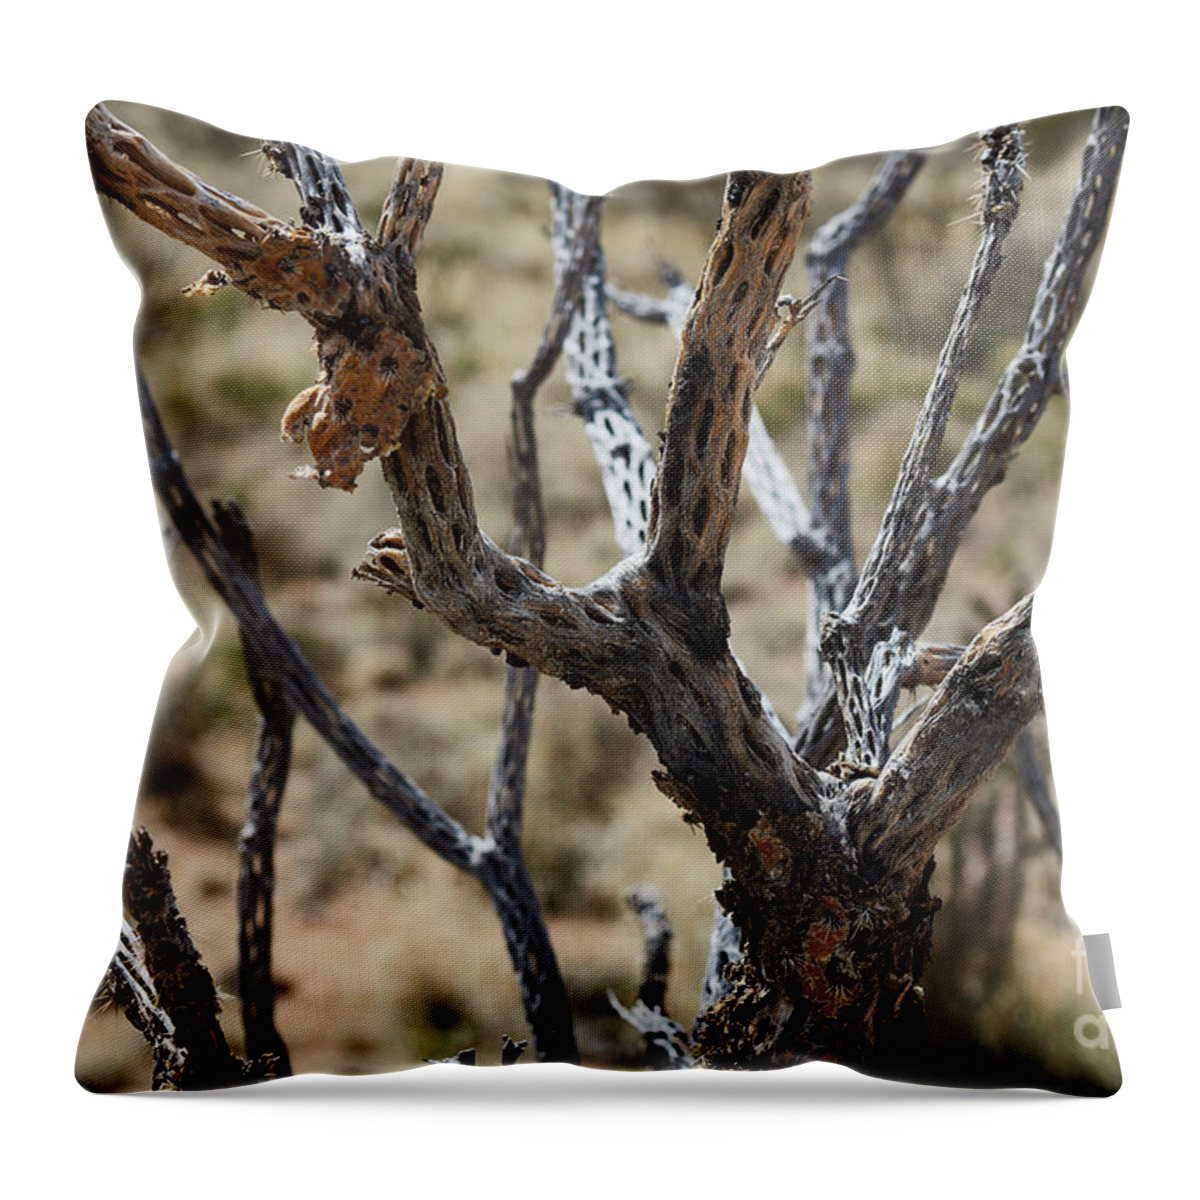 New Mexico Desert Throw Pillow featuring the photograph Southwest Cactus Wood by Robert WK Clark